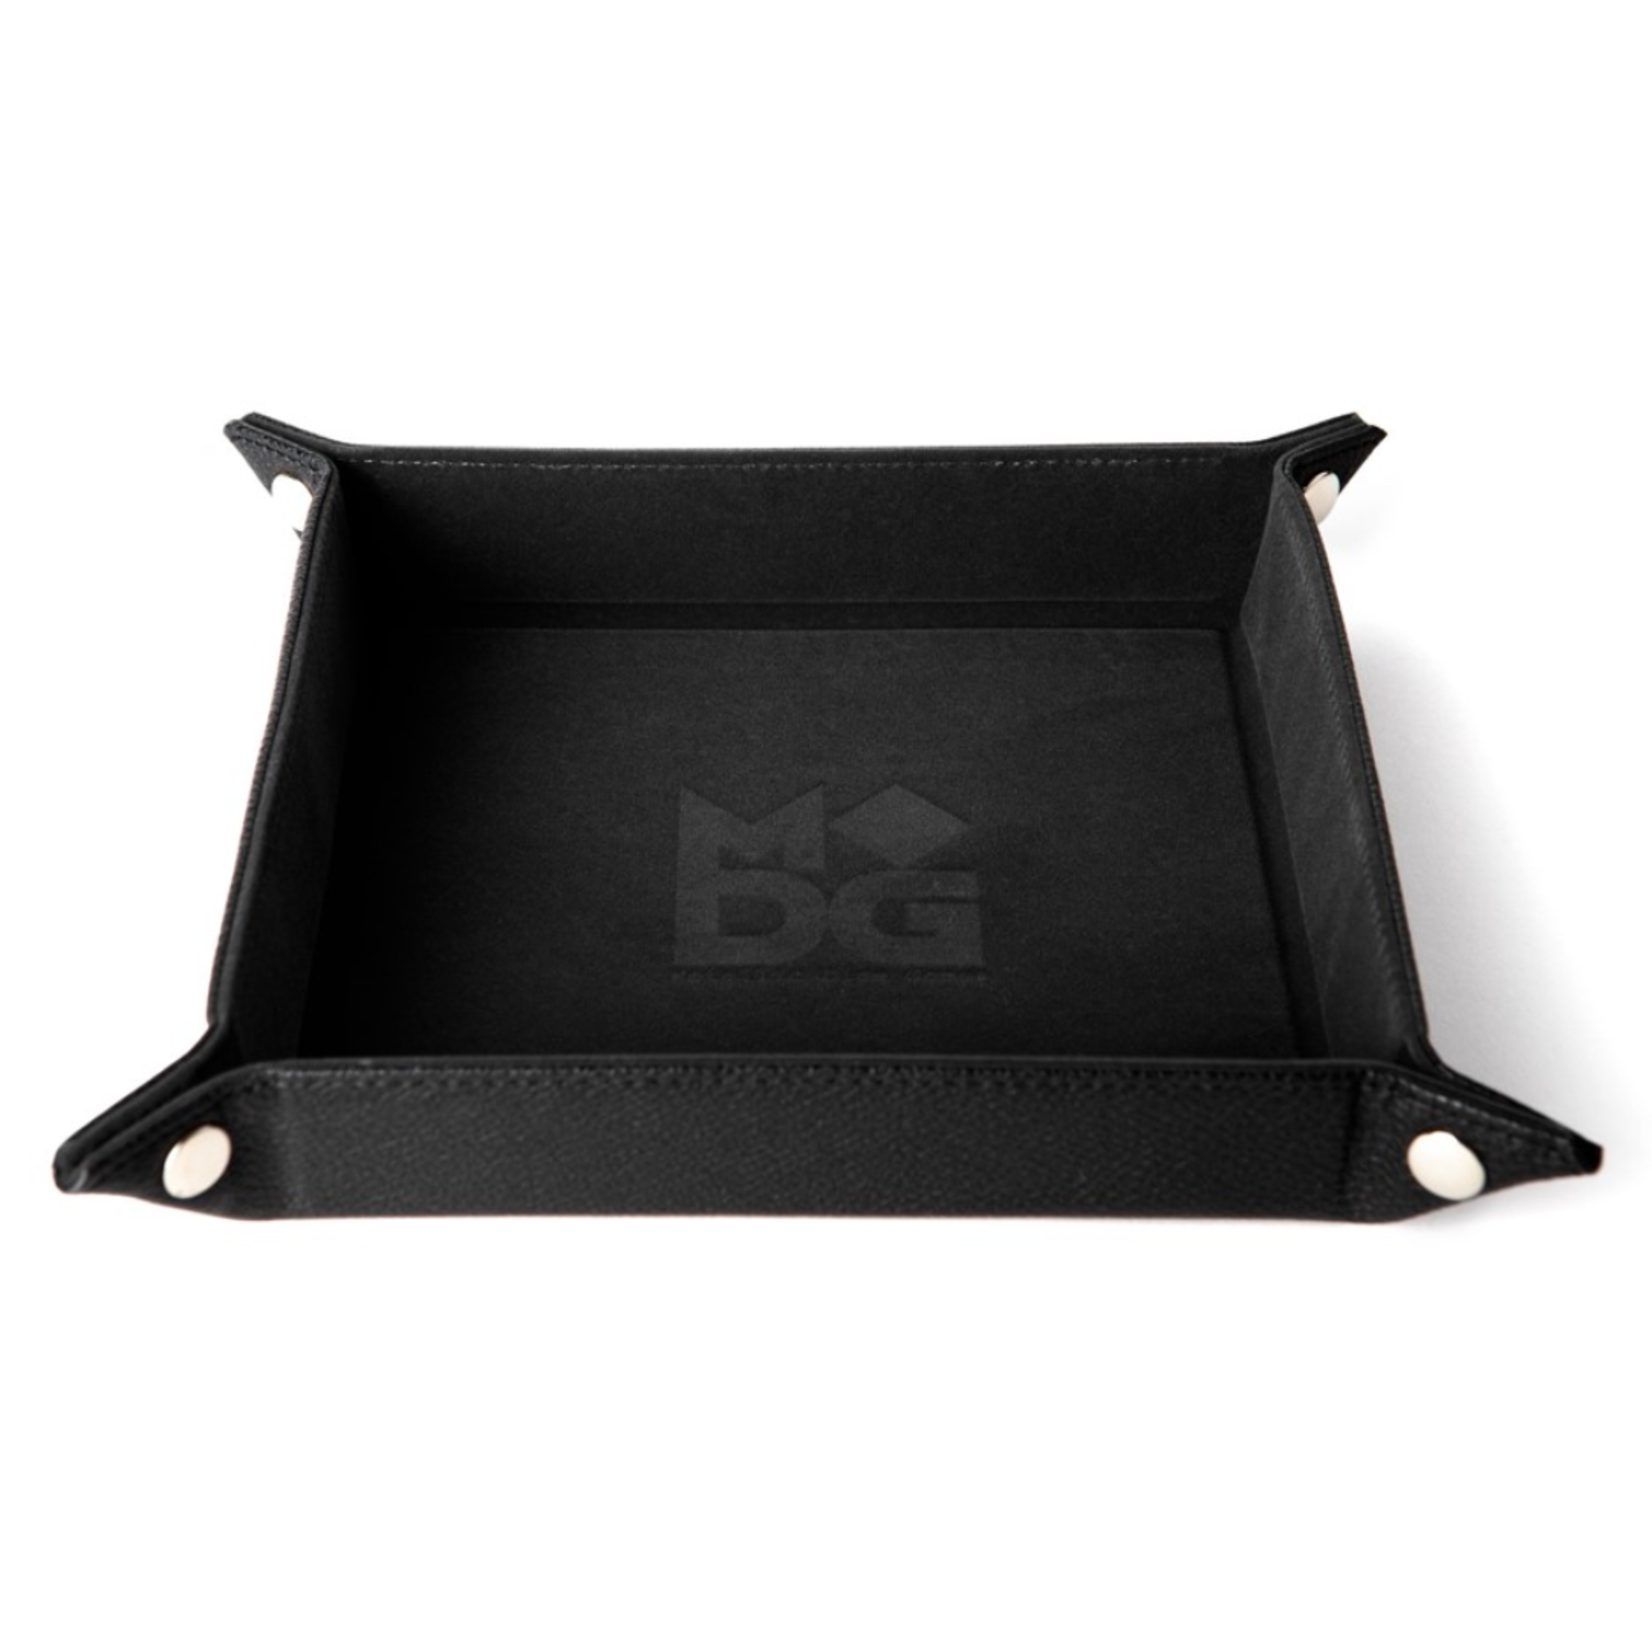 Dice Tray - Fold Up - Leather Black